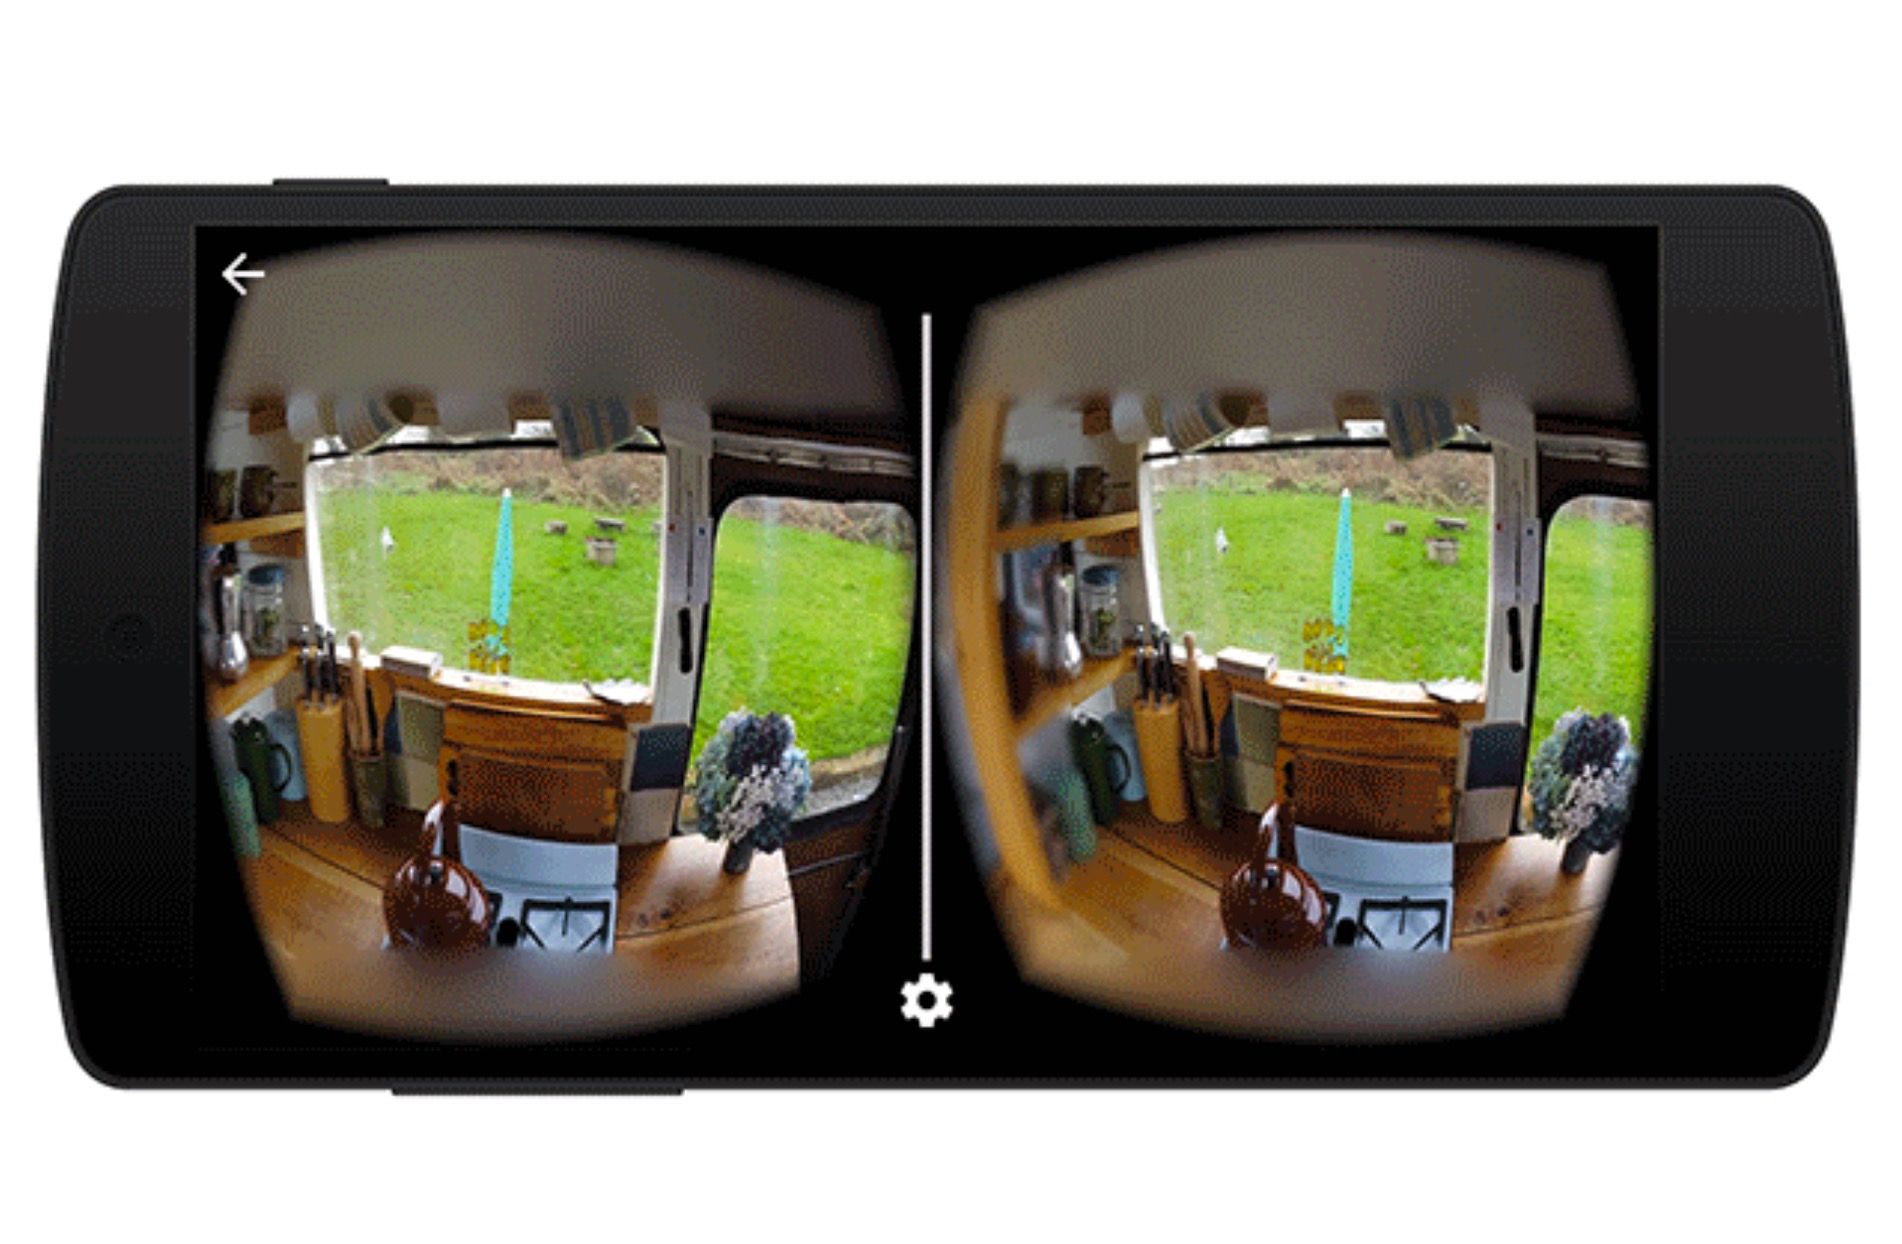 google cardboard camera app what you need to know about vr photos image 1